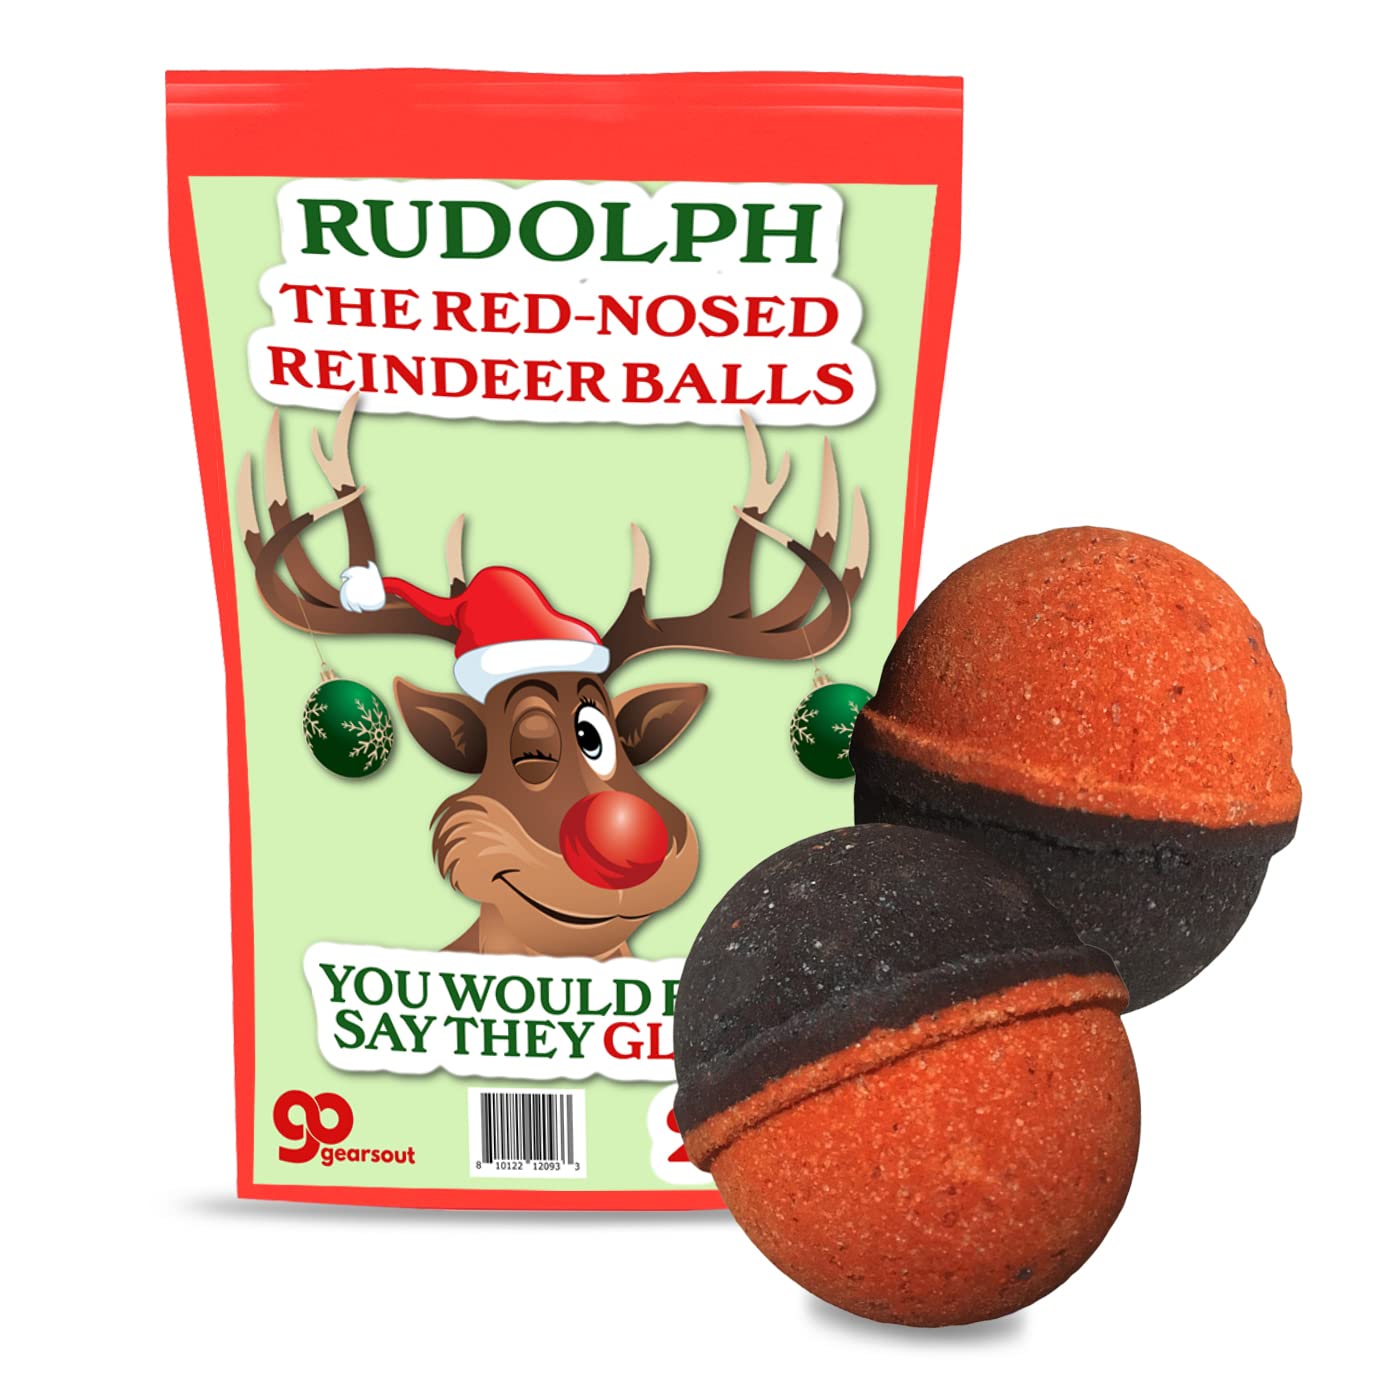 Rudolph Reindeer Balls Bath Bombs - Red Bath Bombs for Women - Adult Christmas Gag Gifts - Funny Reindeer Gifts - Black Cherry Scent